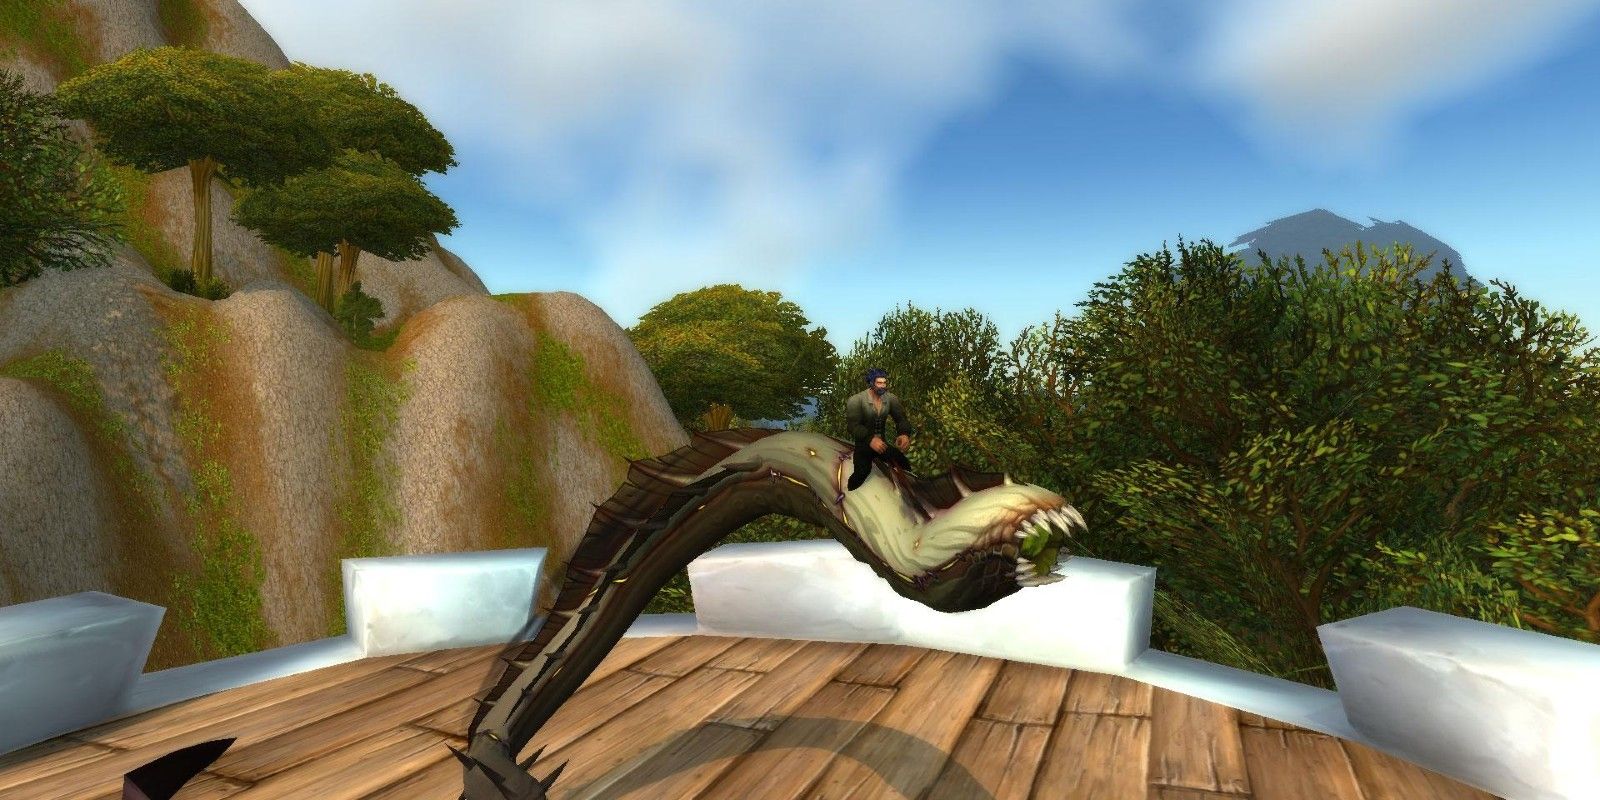 A player rides the Slime Serpent Mount in World of Warcraft: Shadowlands